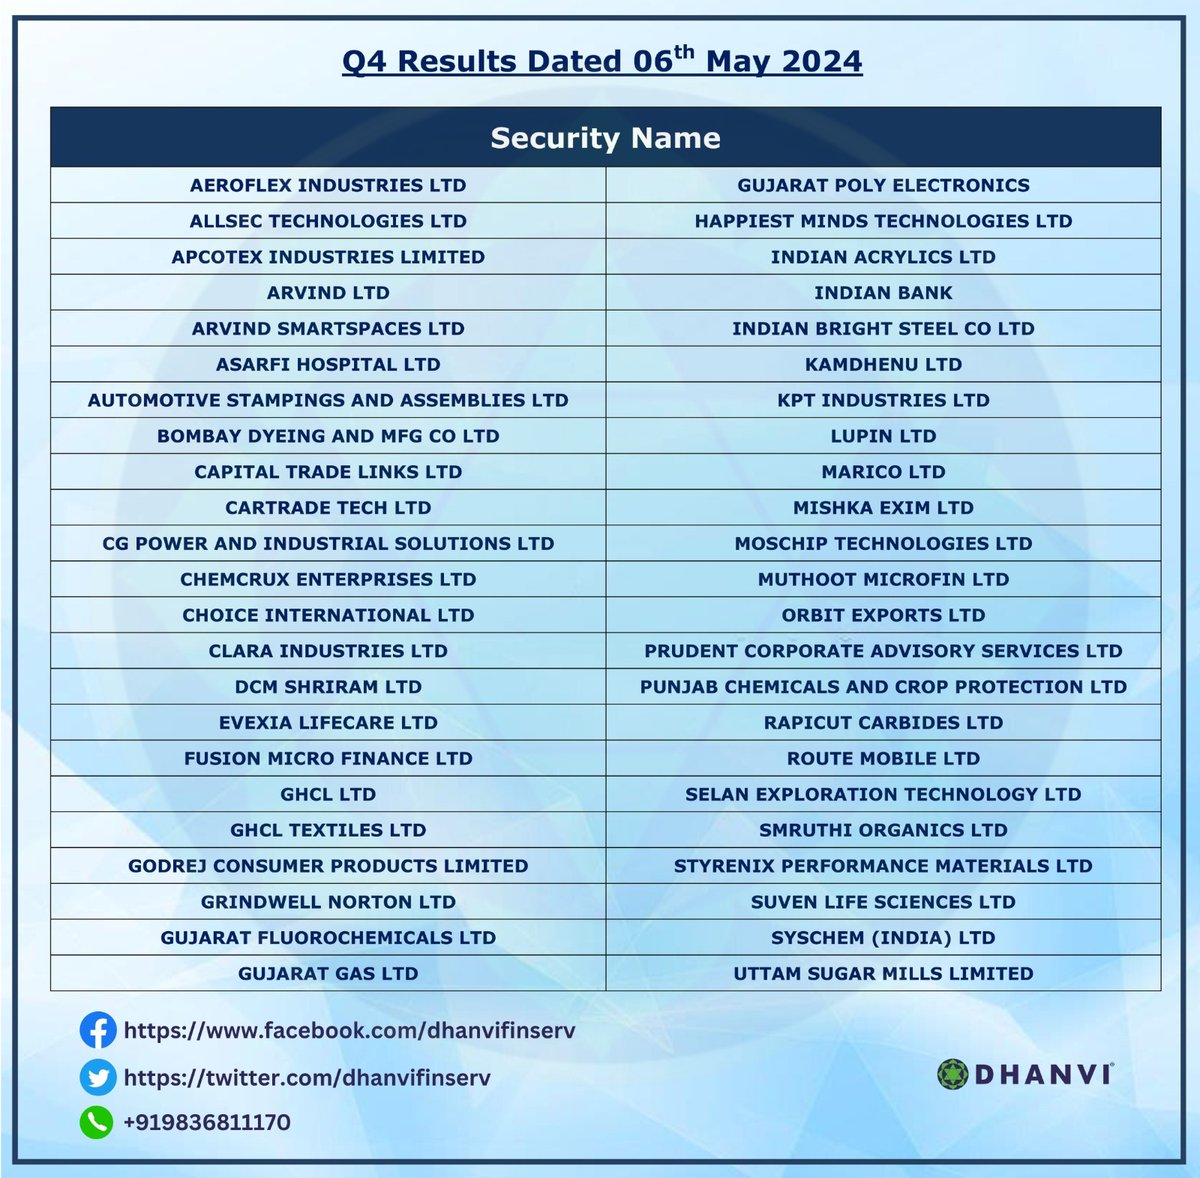 Q4 Results Dated 06th May 2024 👇

#Q4Results #dhanvifinserv #investment #sharemarketindia #sharemarketnews #market #stockmarketindia #bse #nse #niftyfifty #investment #intraday #investor #Resultstoday #Q4 #investors #stock #Q4Earnings #q4marketreport #investments #StockToWatch